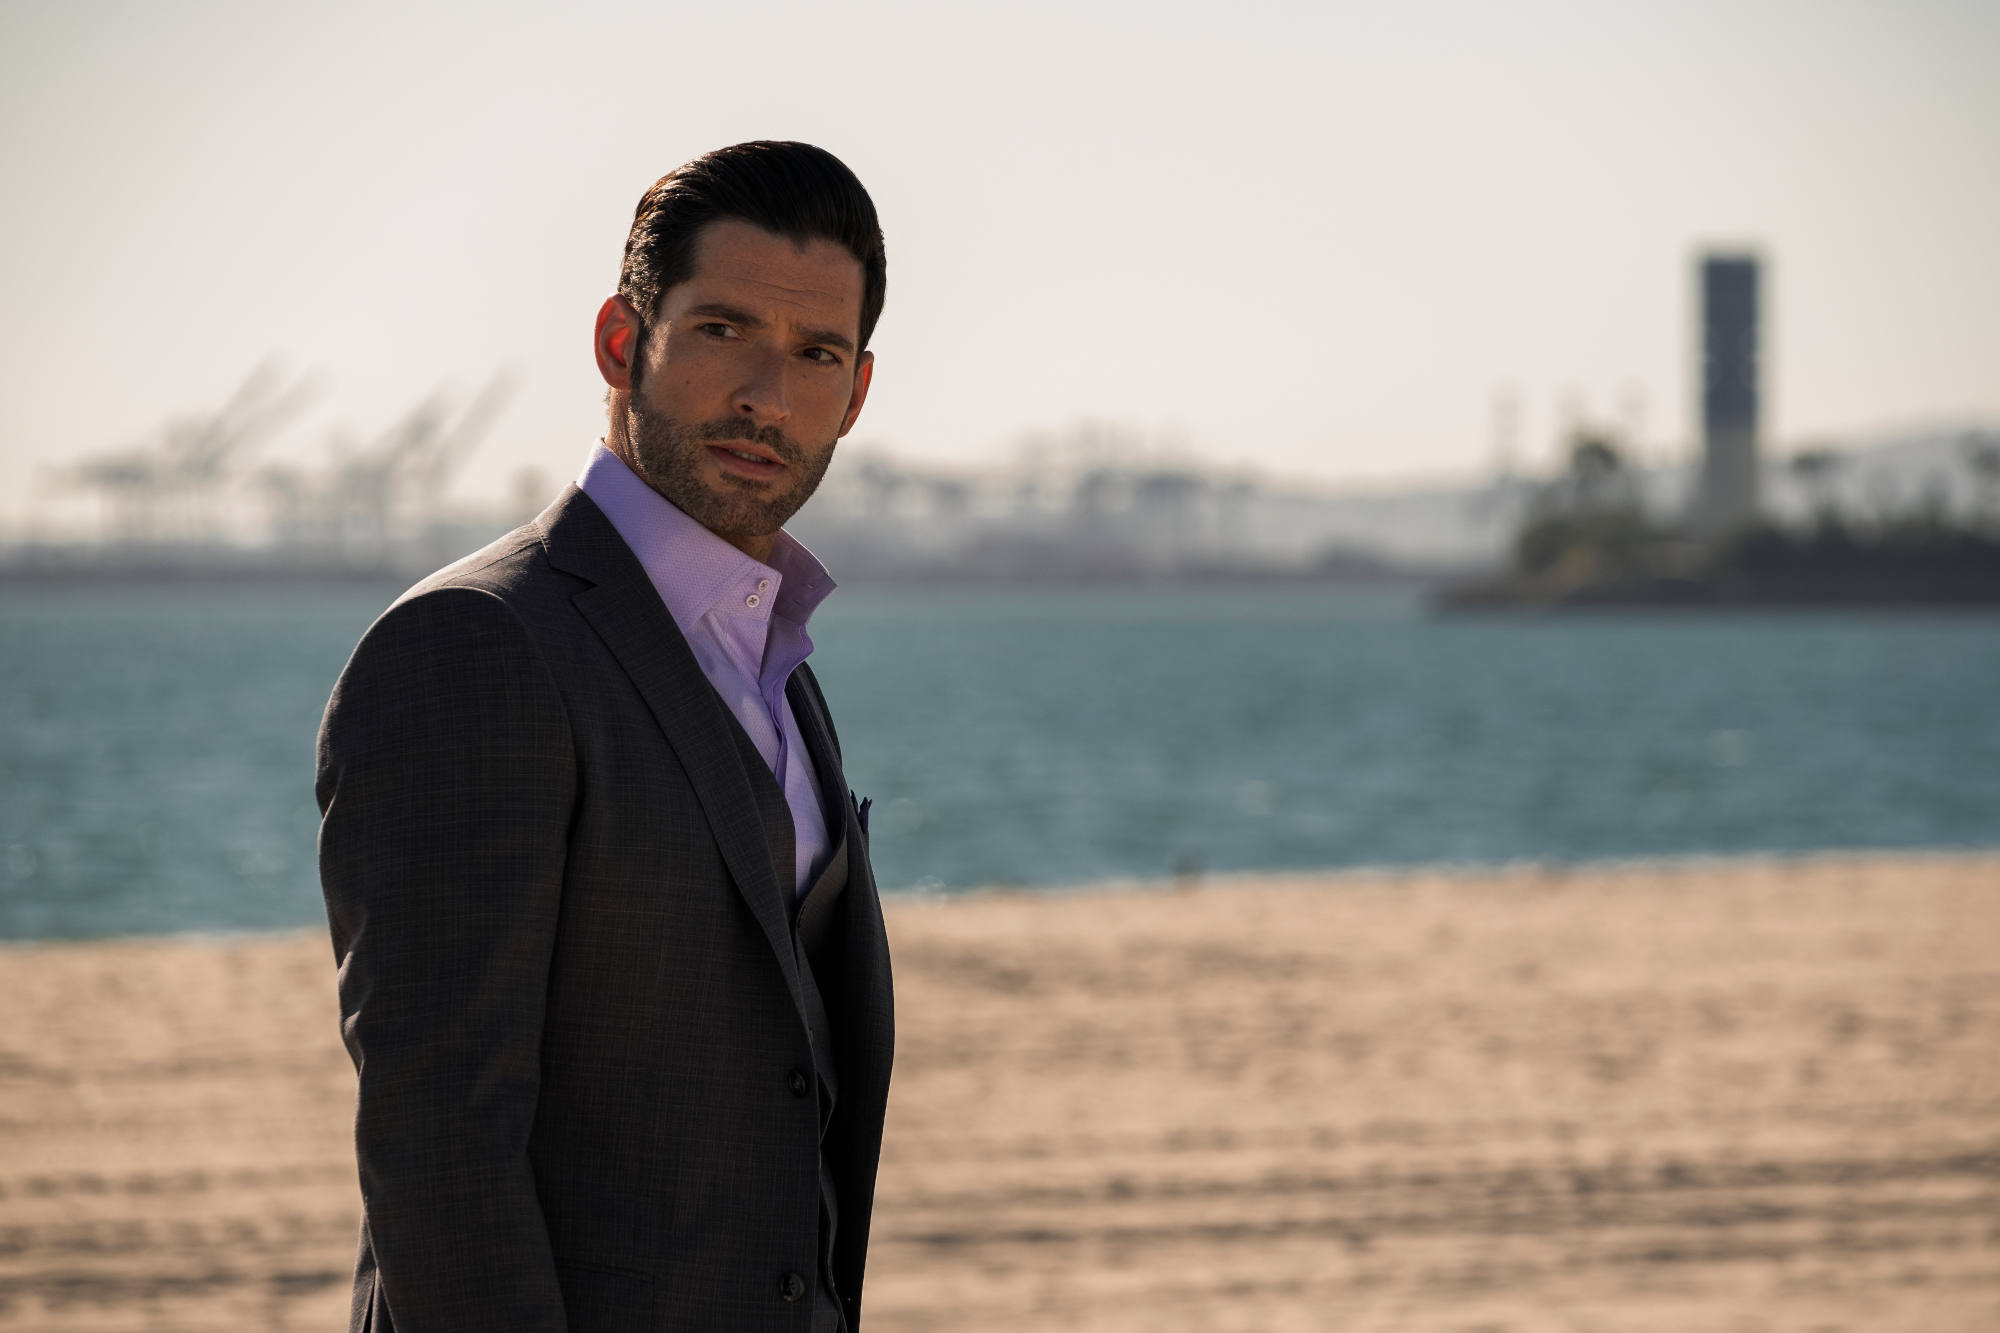 Tom Ellis as Lucifer Morningstar in 'Lucifer' Season 5 on Netflix. He's wearing a suit and standing on the beach.